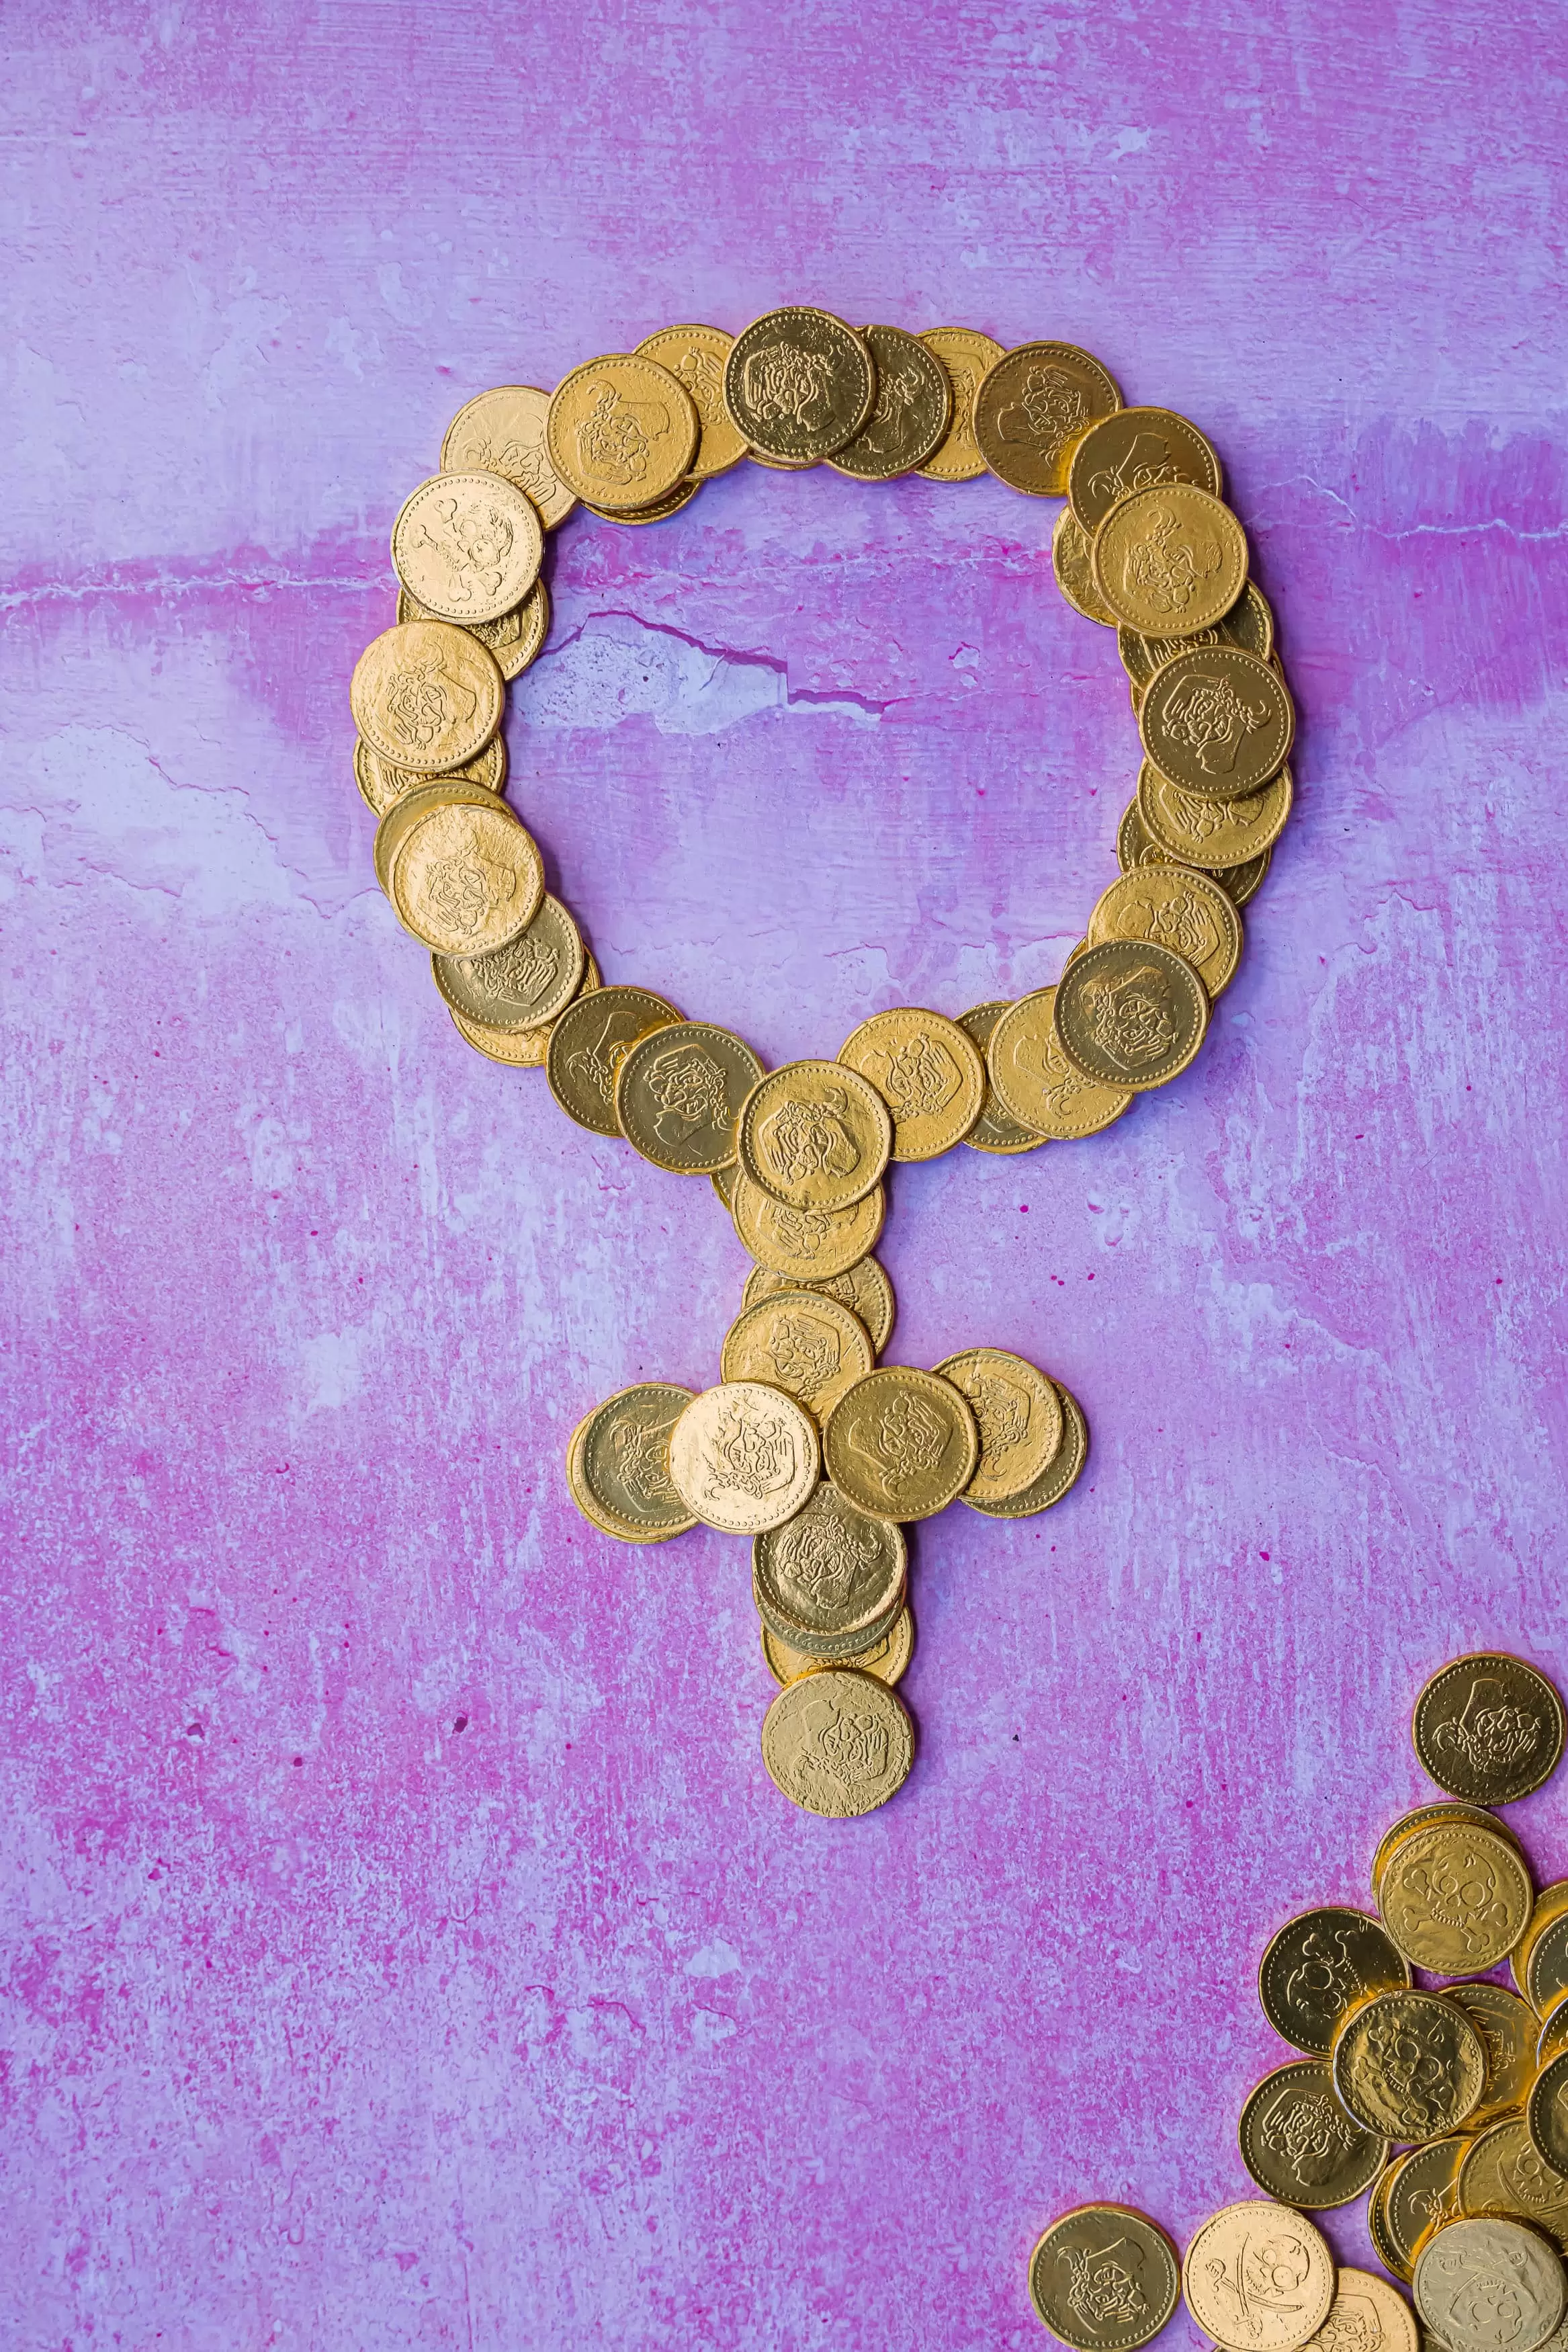 Female symbol in gold coins and purple background